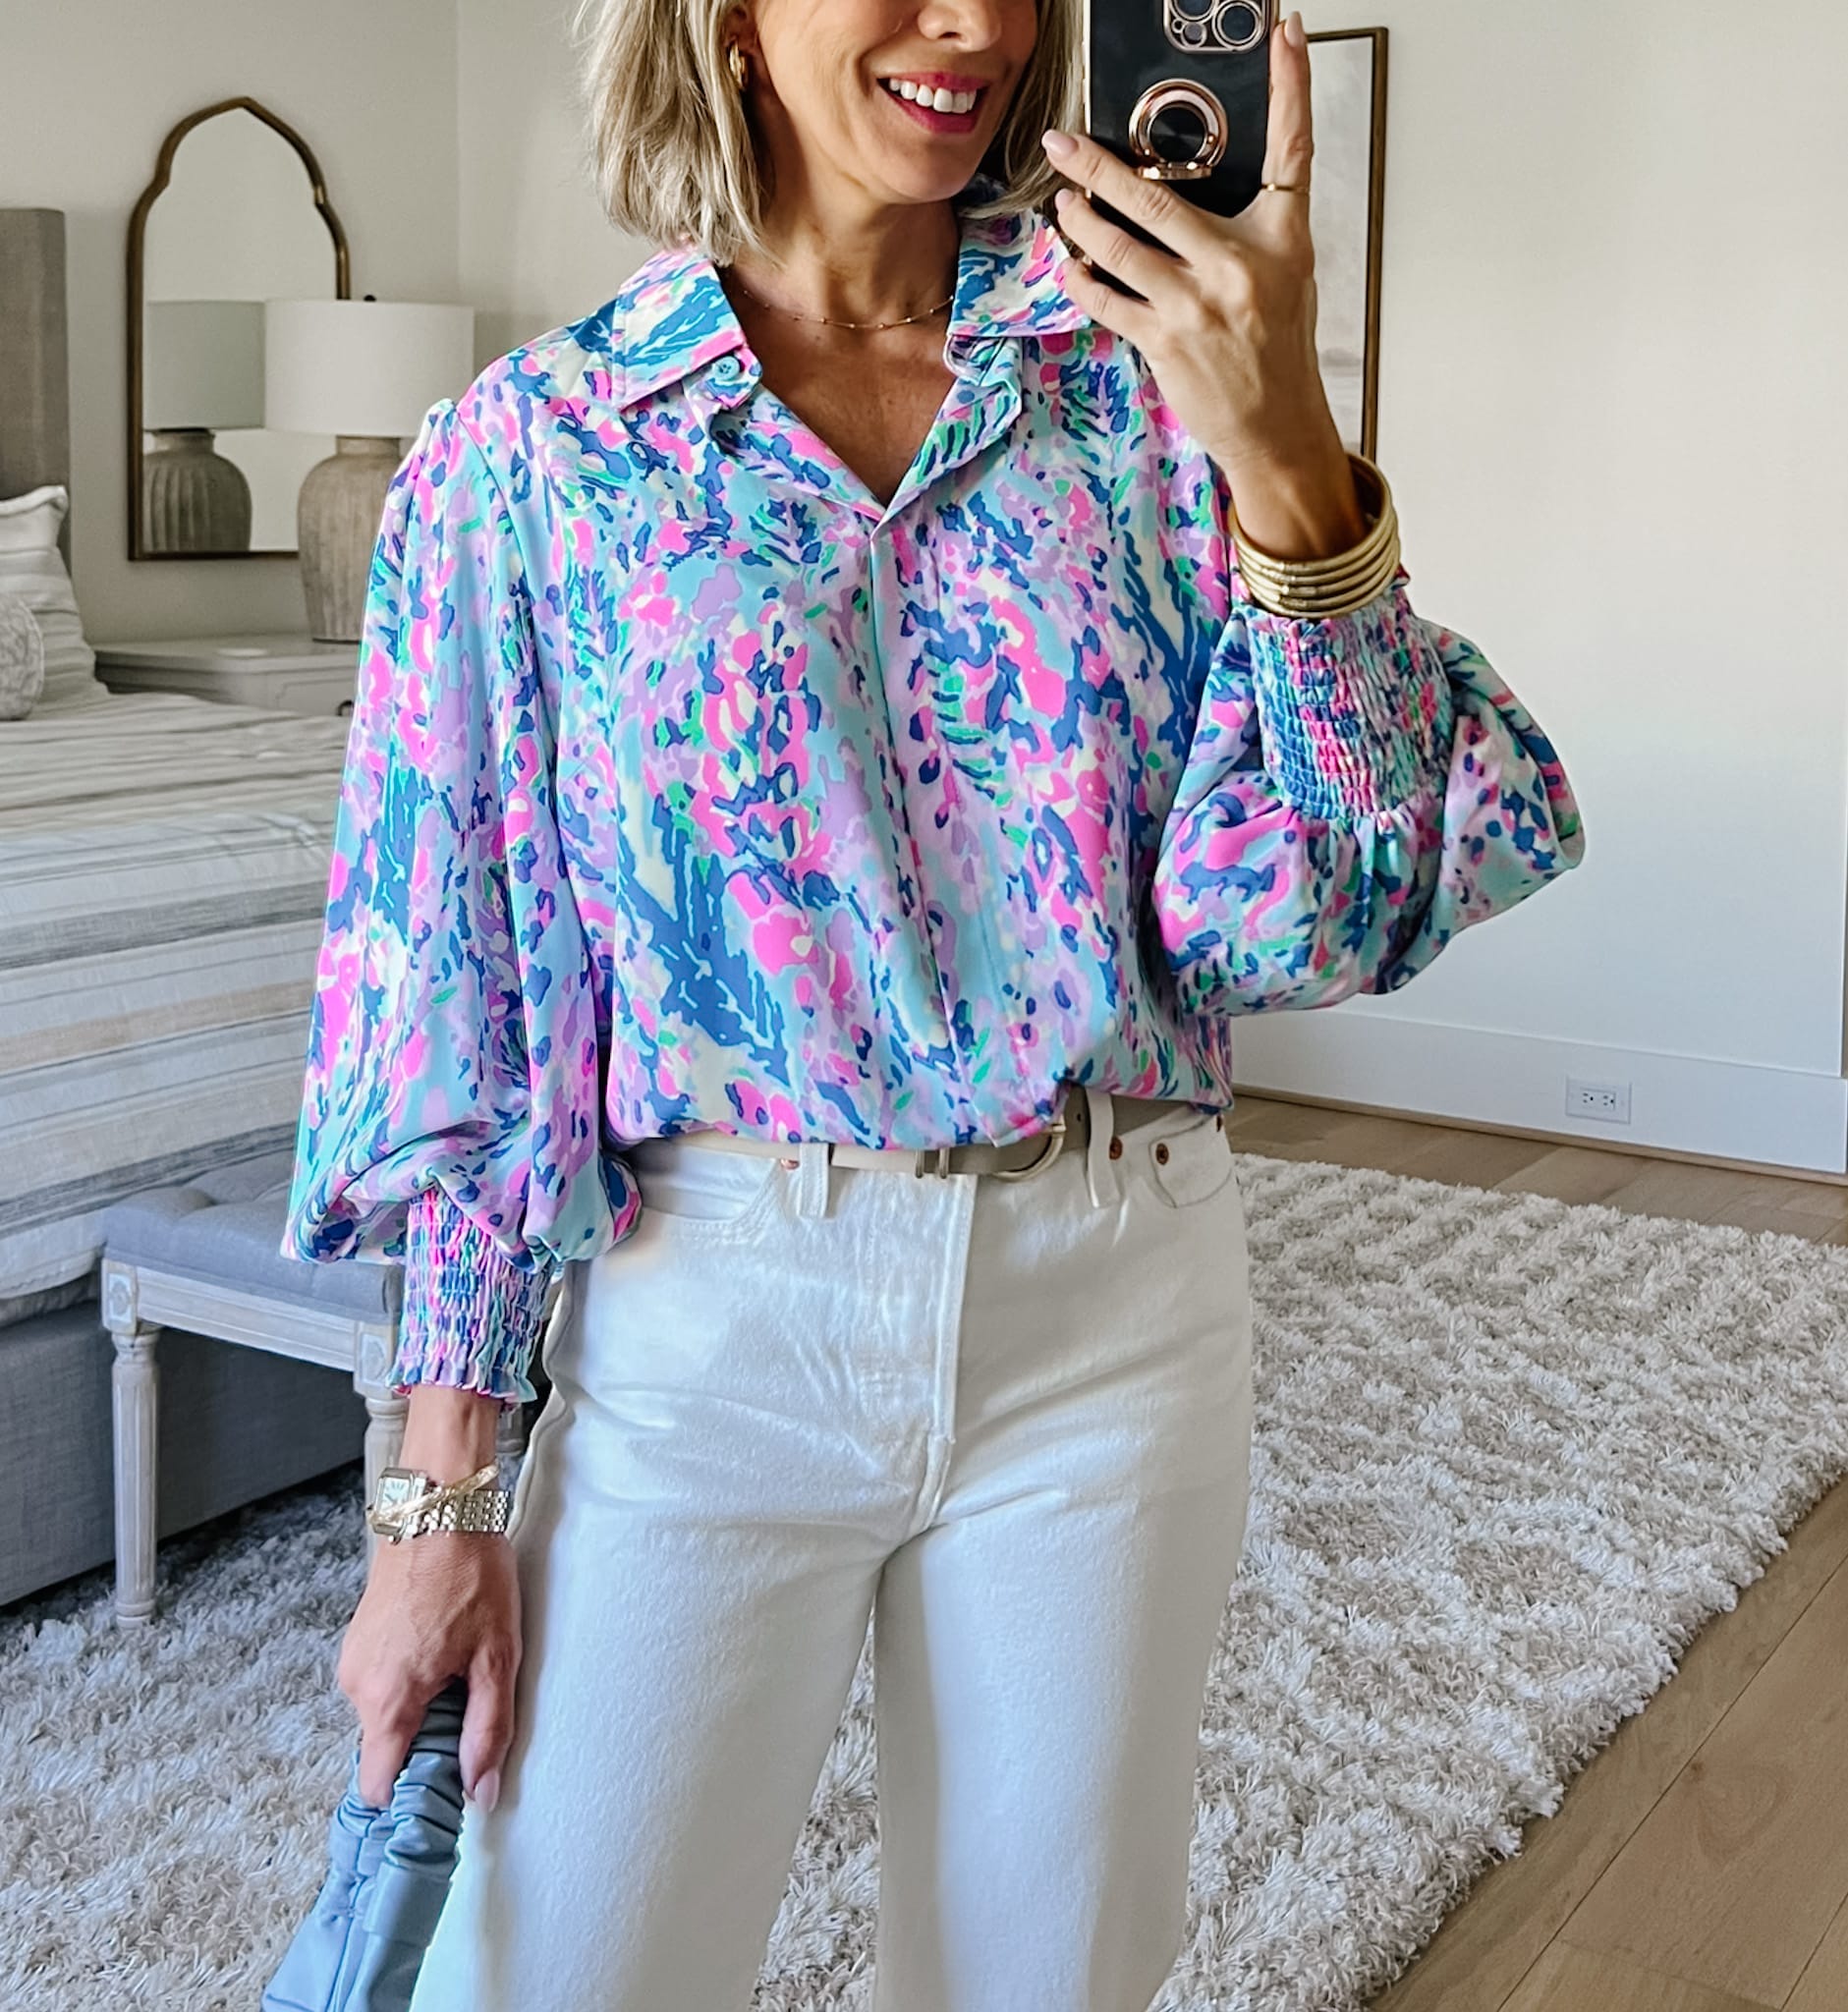 Lily Pulitzer Style Top, White Jeans, Sandals